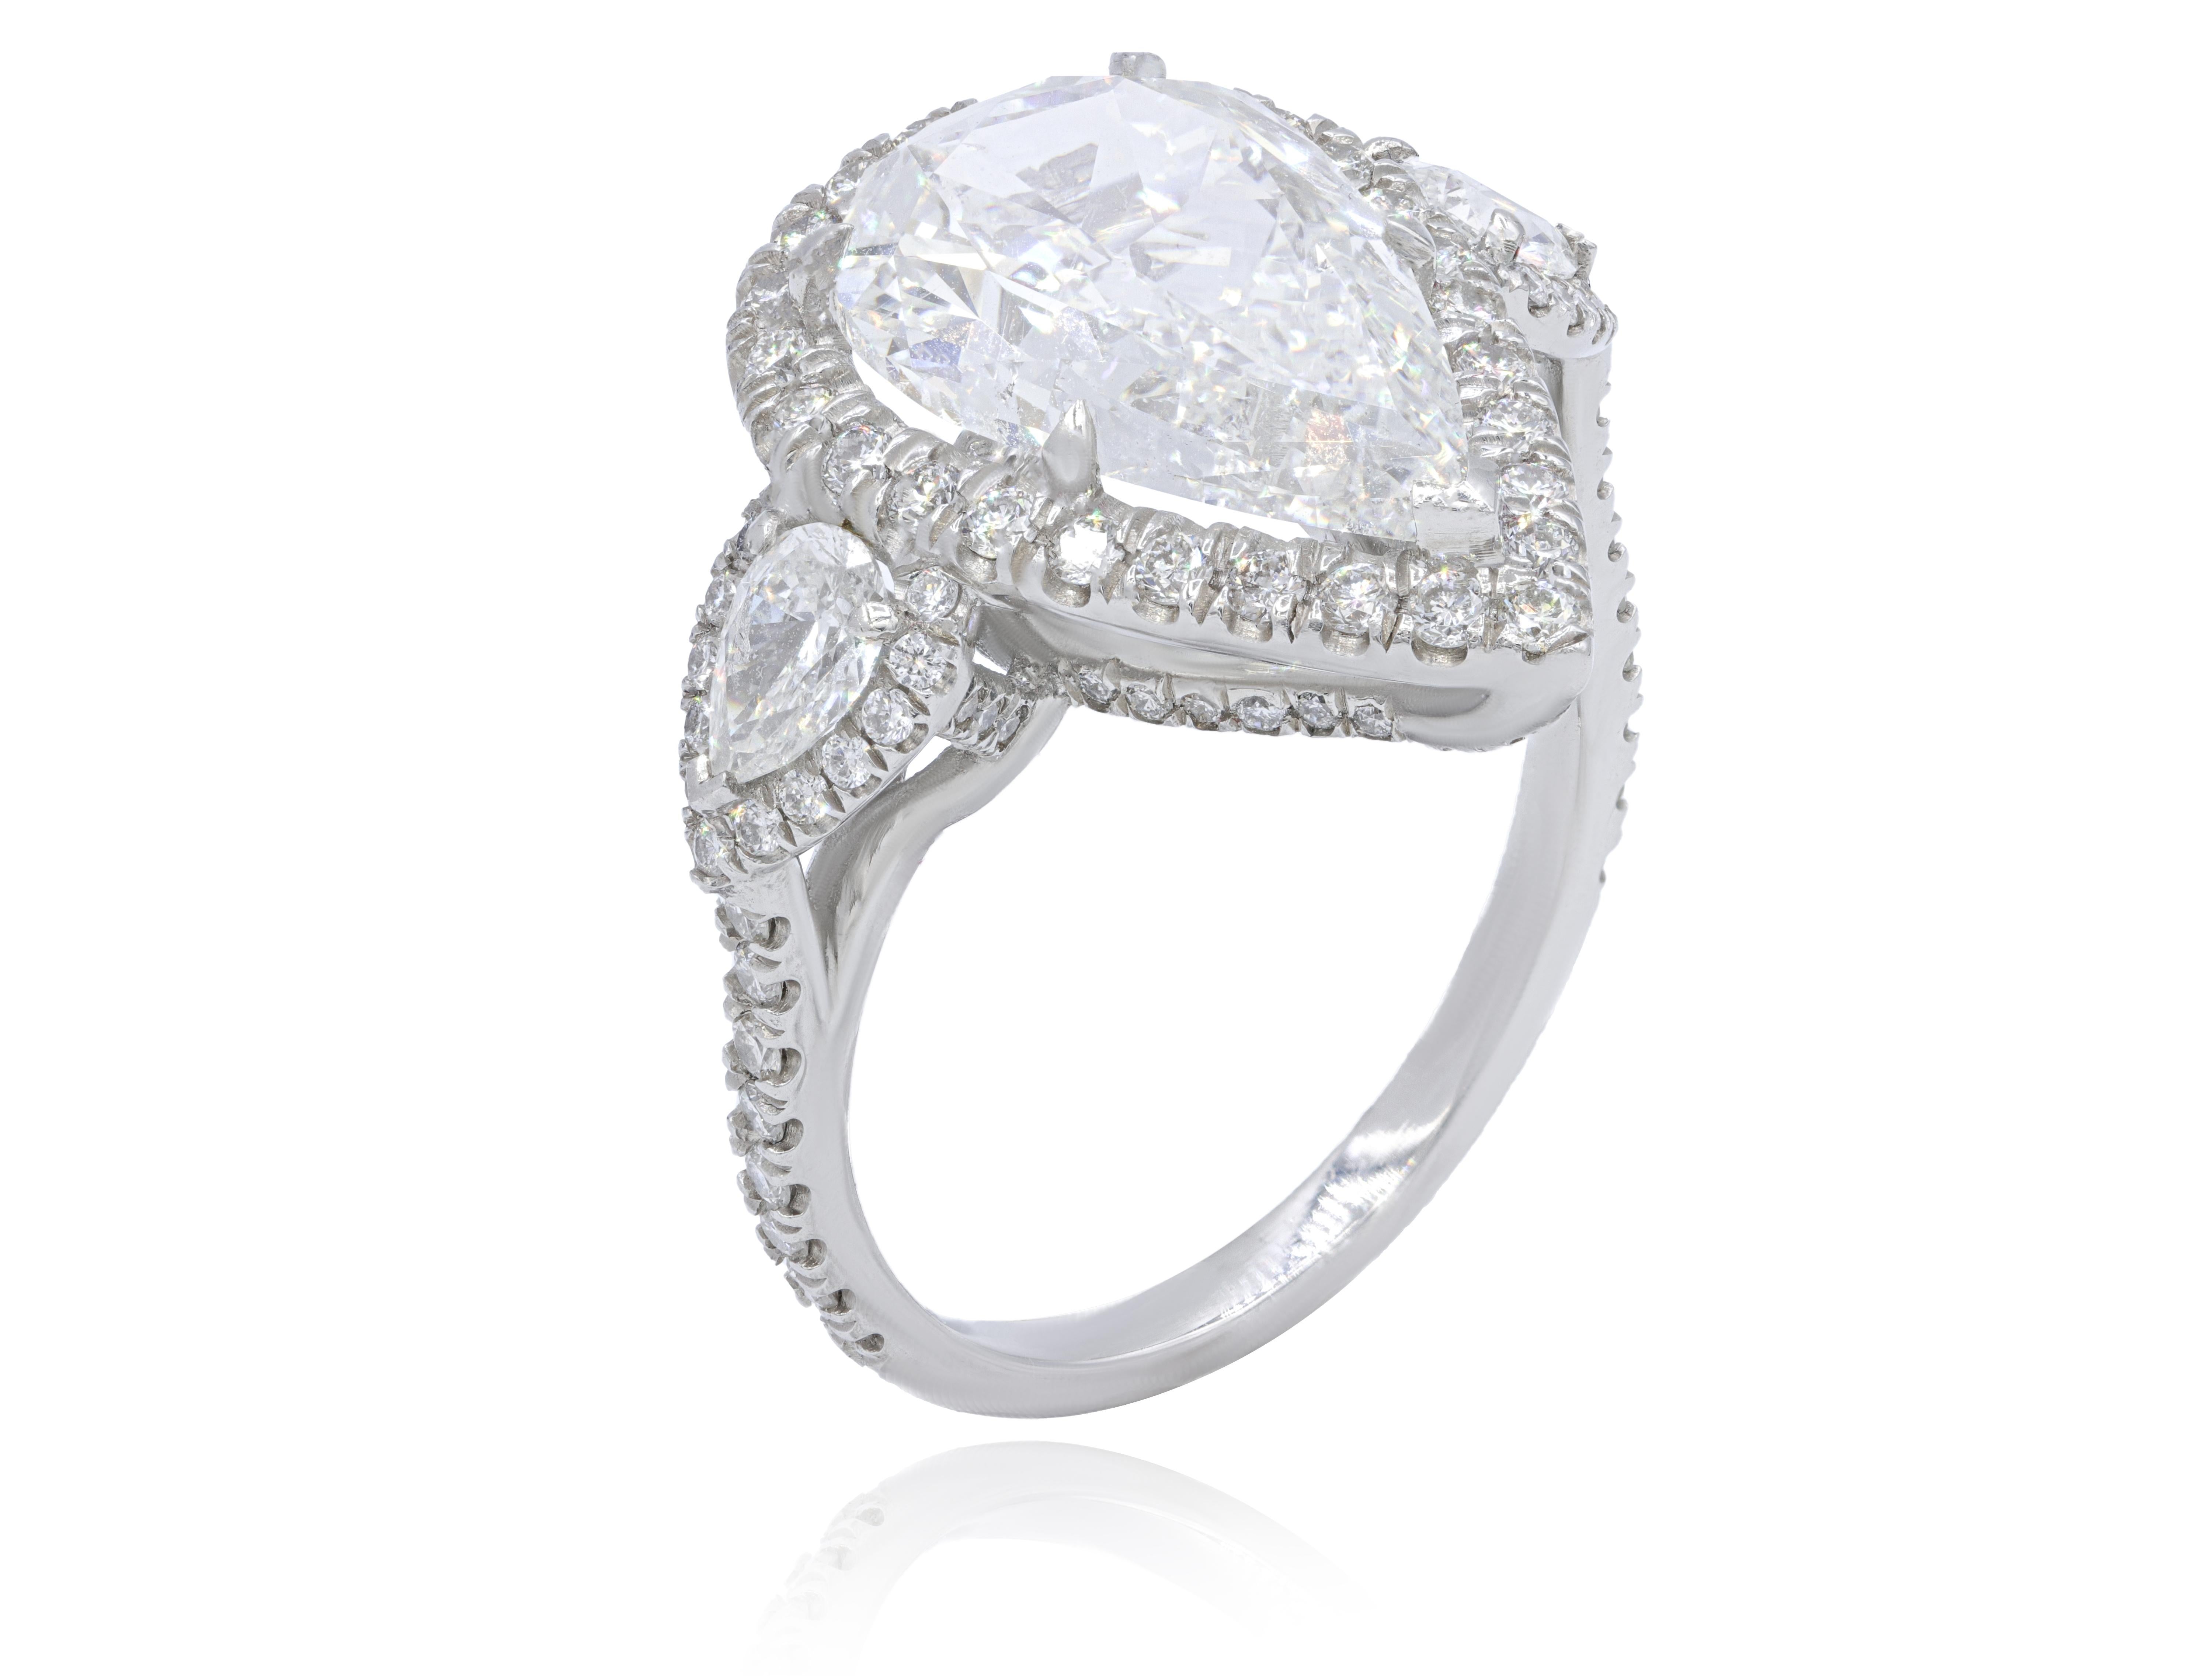 Platinum engagement ring featuring a center 5.01 ct GIA certified (G-SI2) pear shaped diamond with 2.50 cts tw of diamonds in a halo design 

Diana M is one-stop shop for all your jewelry shopping, carrying line of diamond rings, earrings,